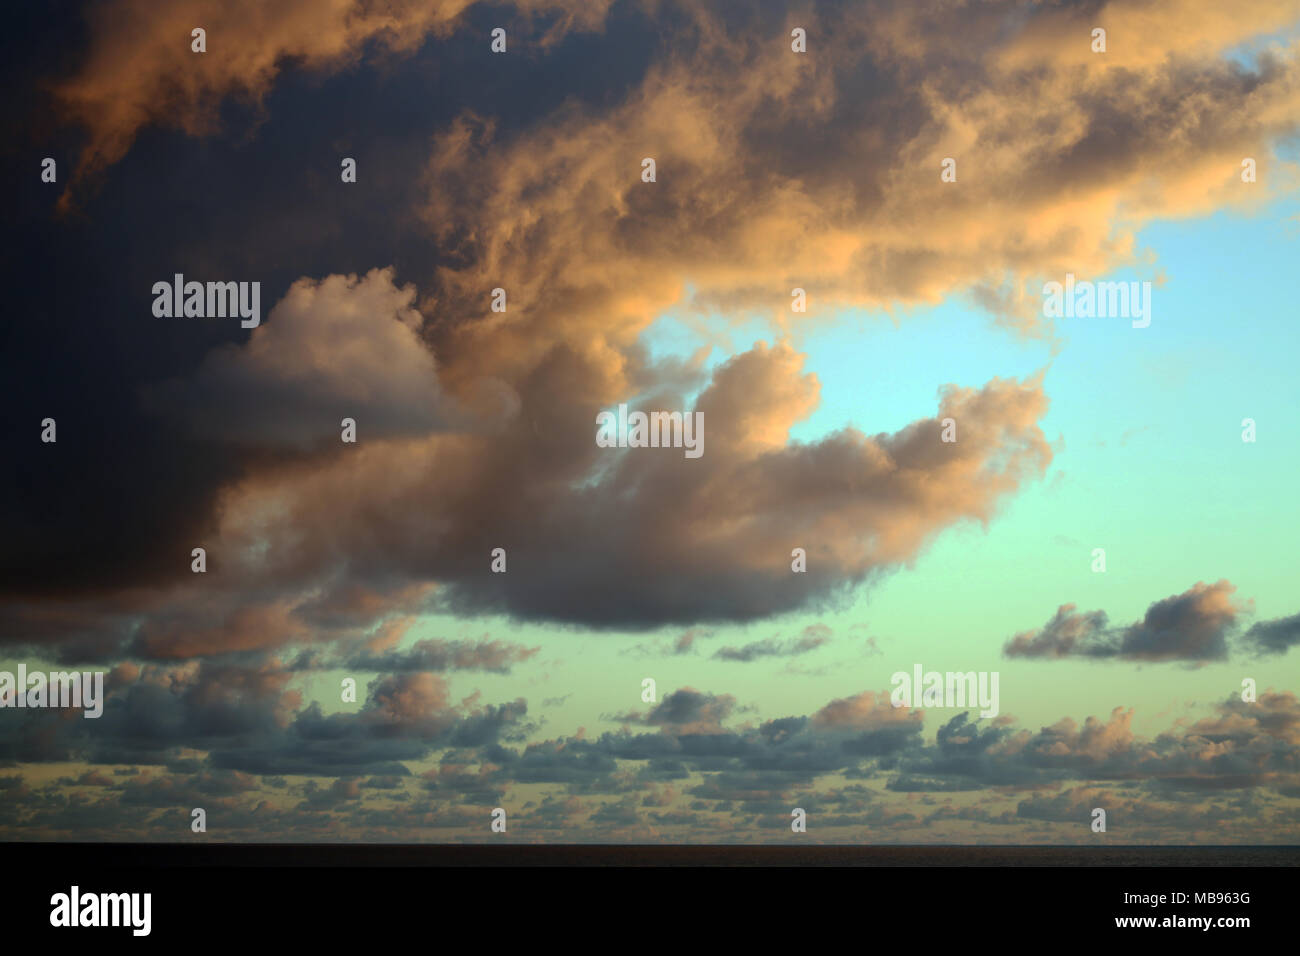 early morning dark clouds with greenish blue sky peeking out Stock Photo